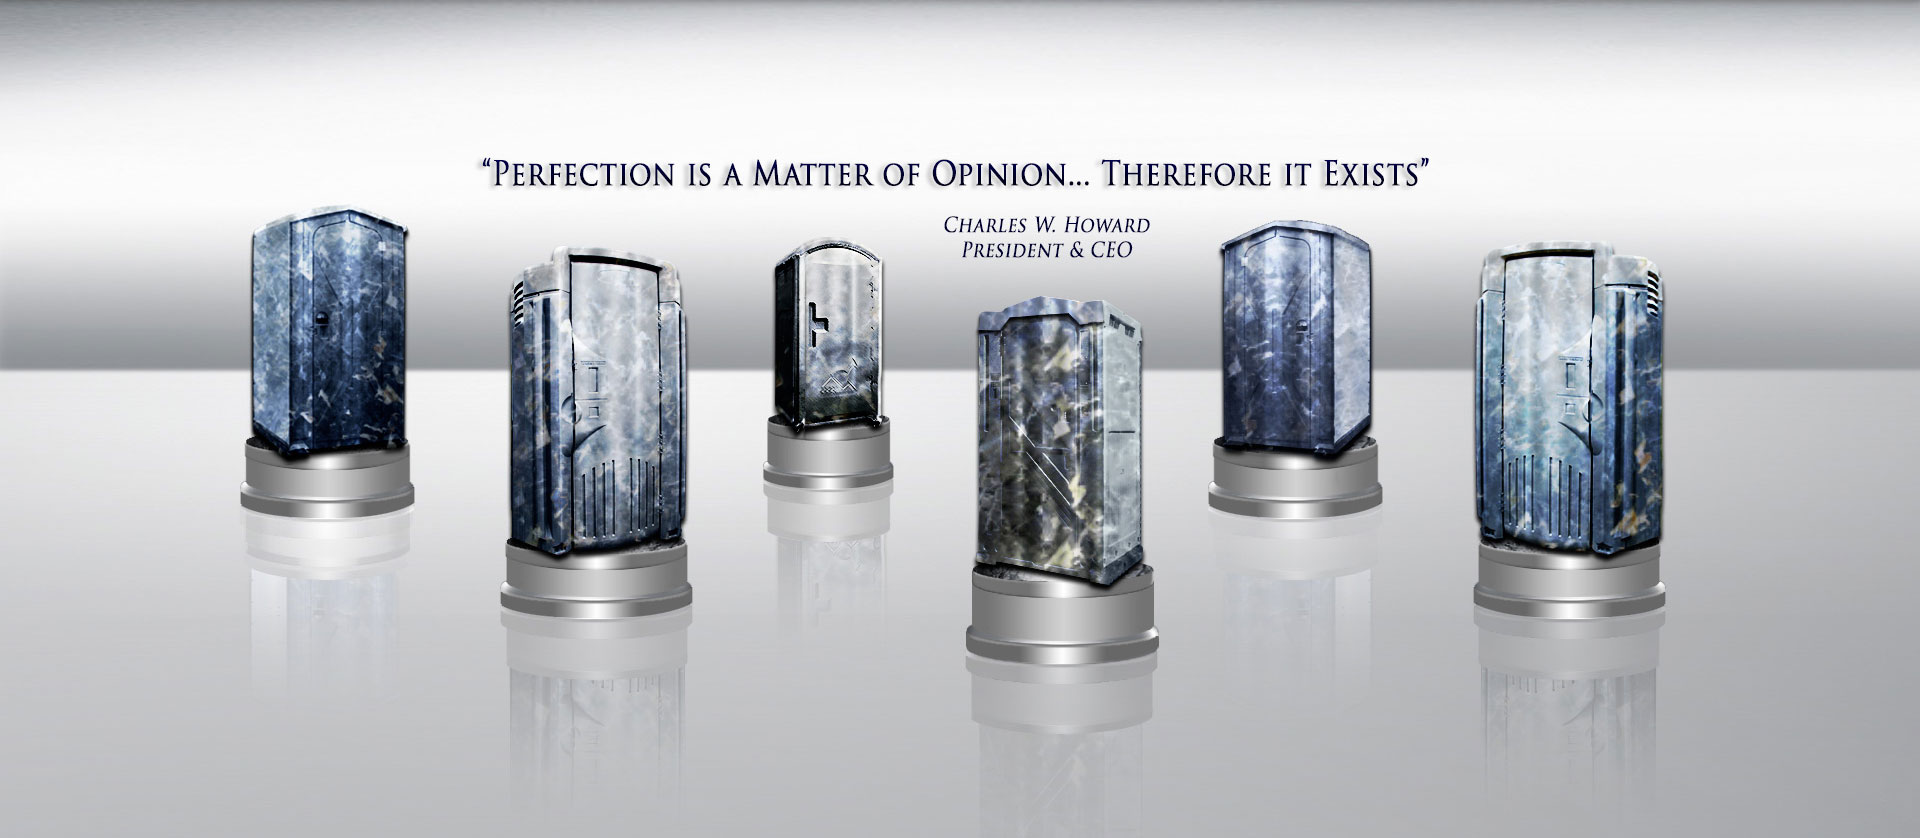 Perfection is a matter of opinion... Therefore it exists - Charles W. Howard, President & CEO